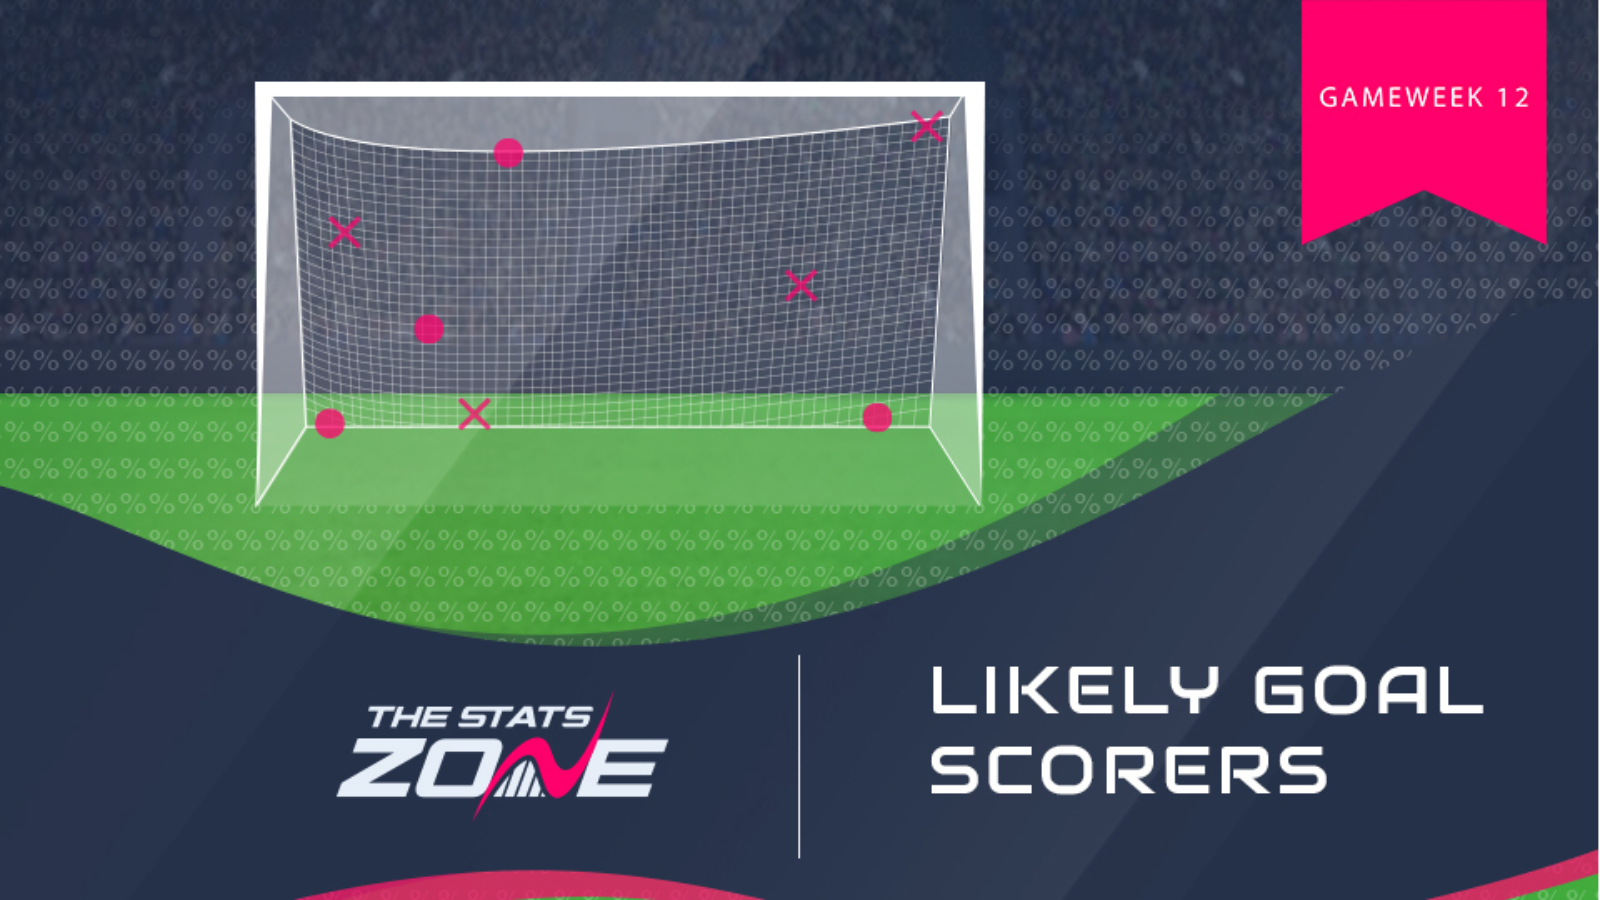 FPL Gameweek 12 – likely goalscorers - The Stats Zone